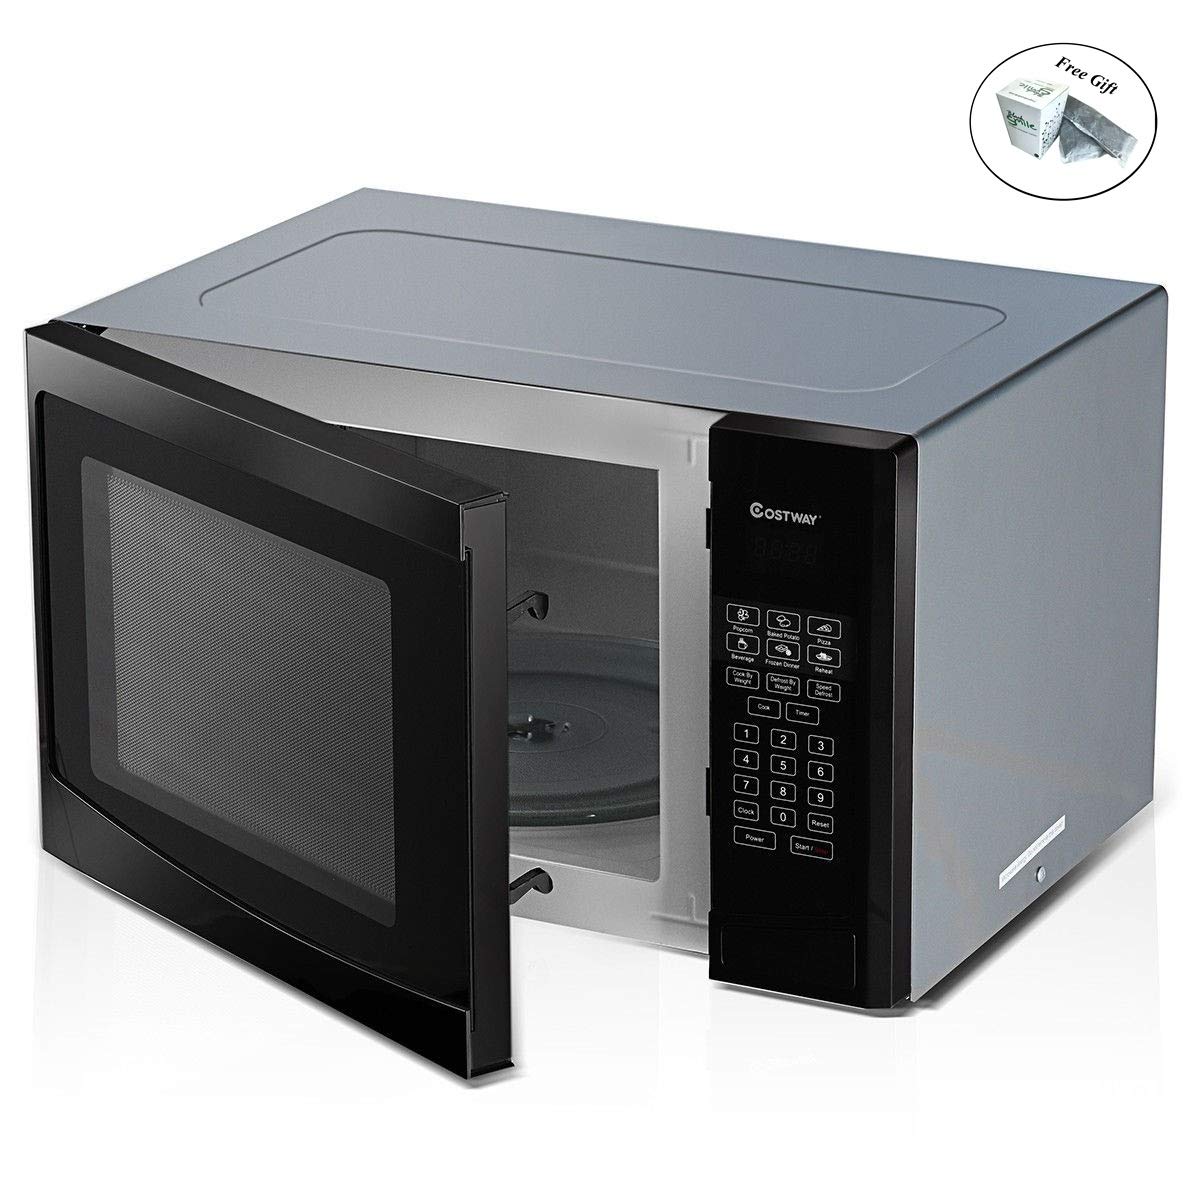 Costway 1.1 cu. ft. Programmable Microwave Oven 1000W LED Display Only by eight24hours + SPECIAL GIFT